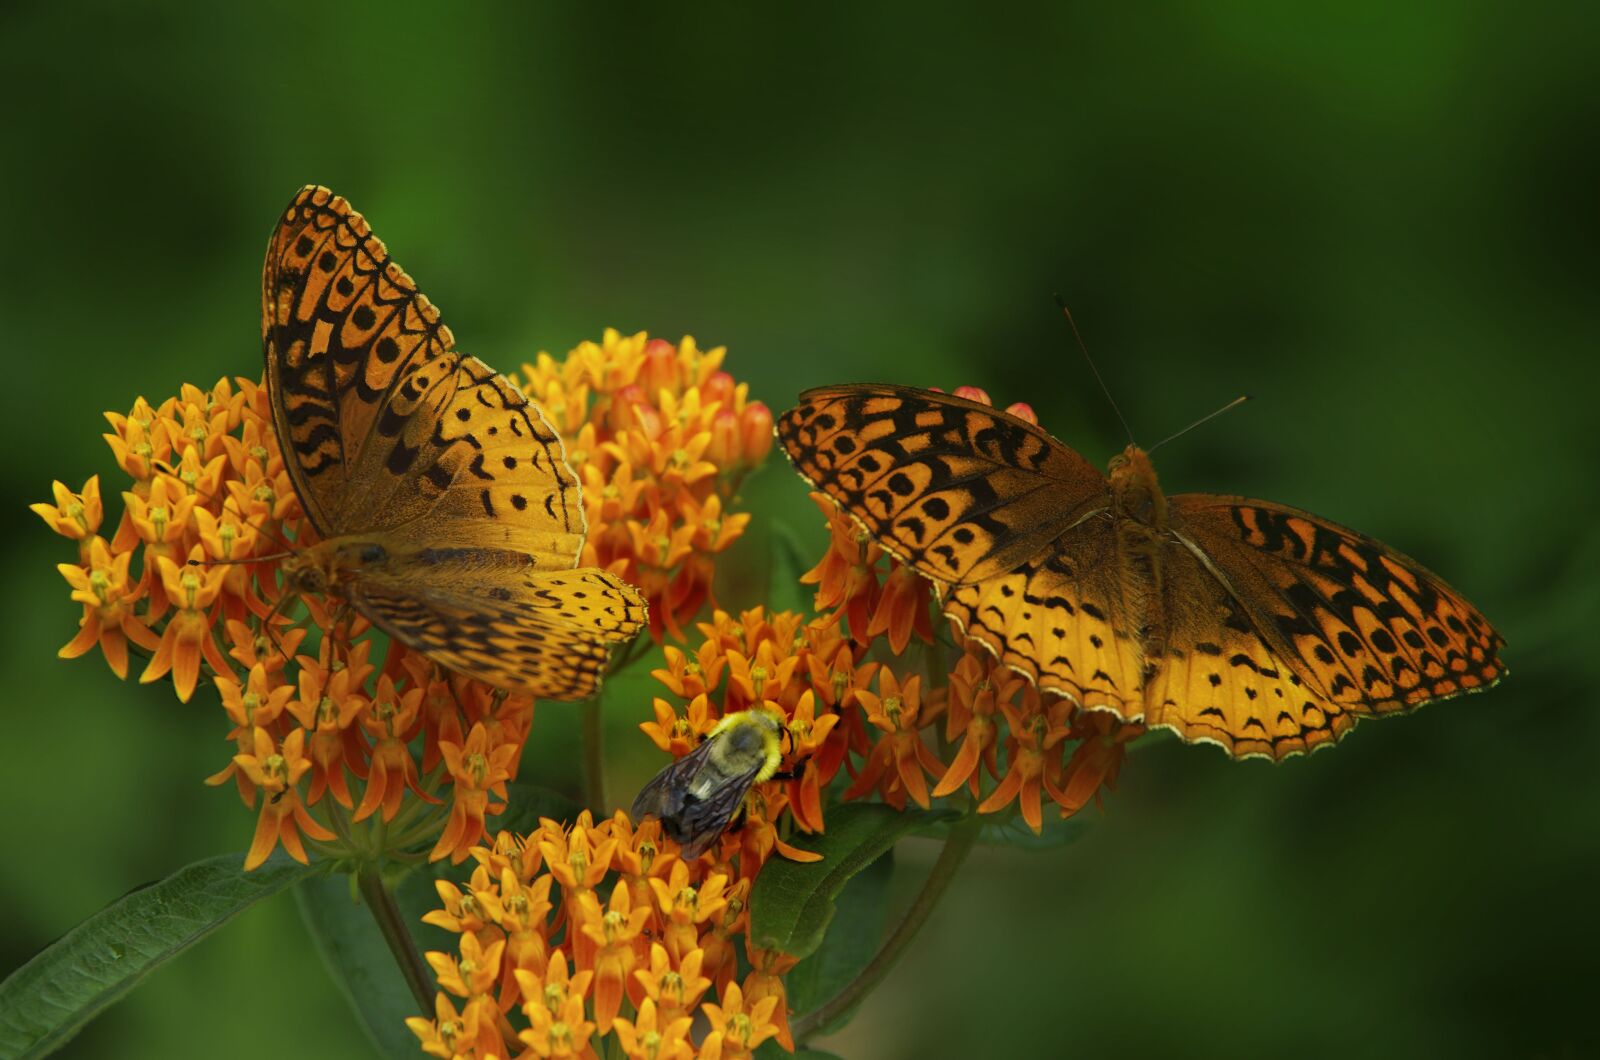 Pentax smc DA 18-135mm F3.5-5.6ED AL [IF] DC WR sample photo. Butterfly, butterfly weed, orange photography